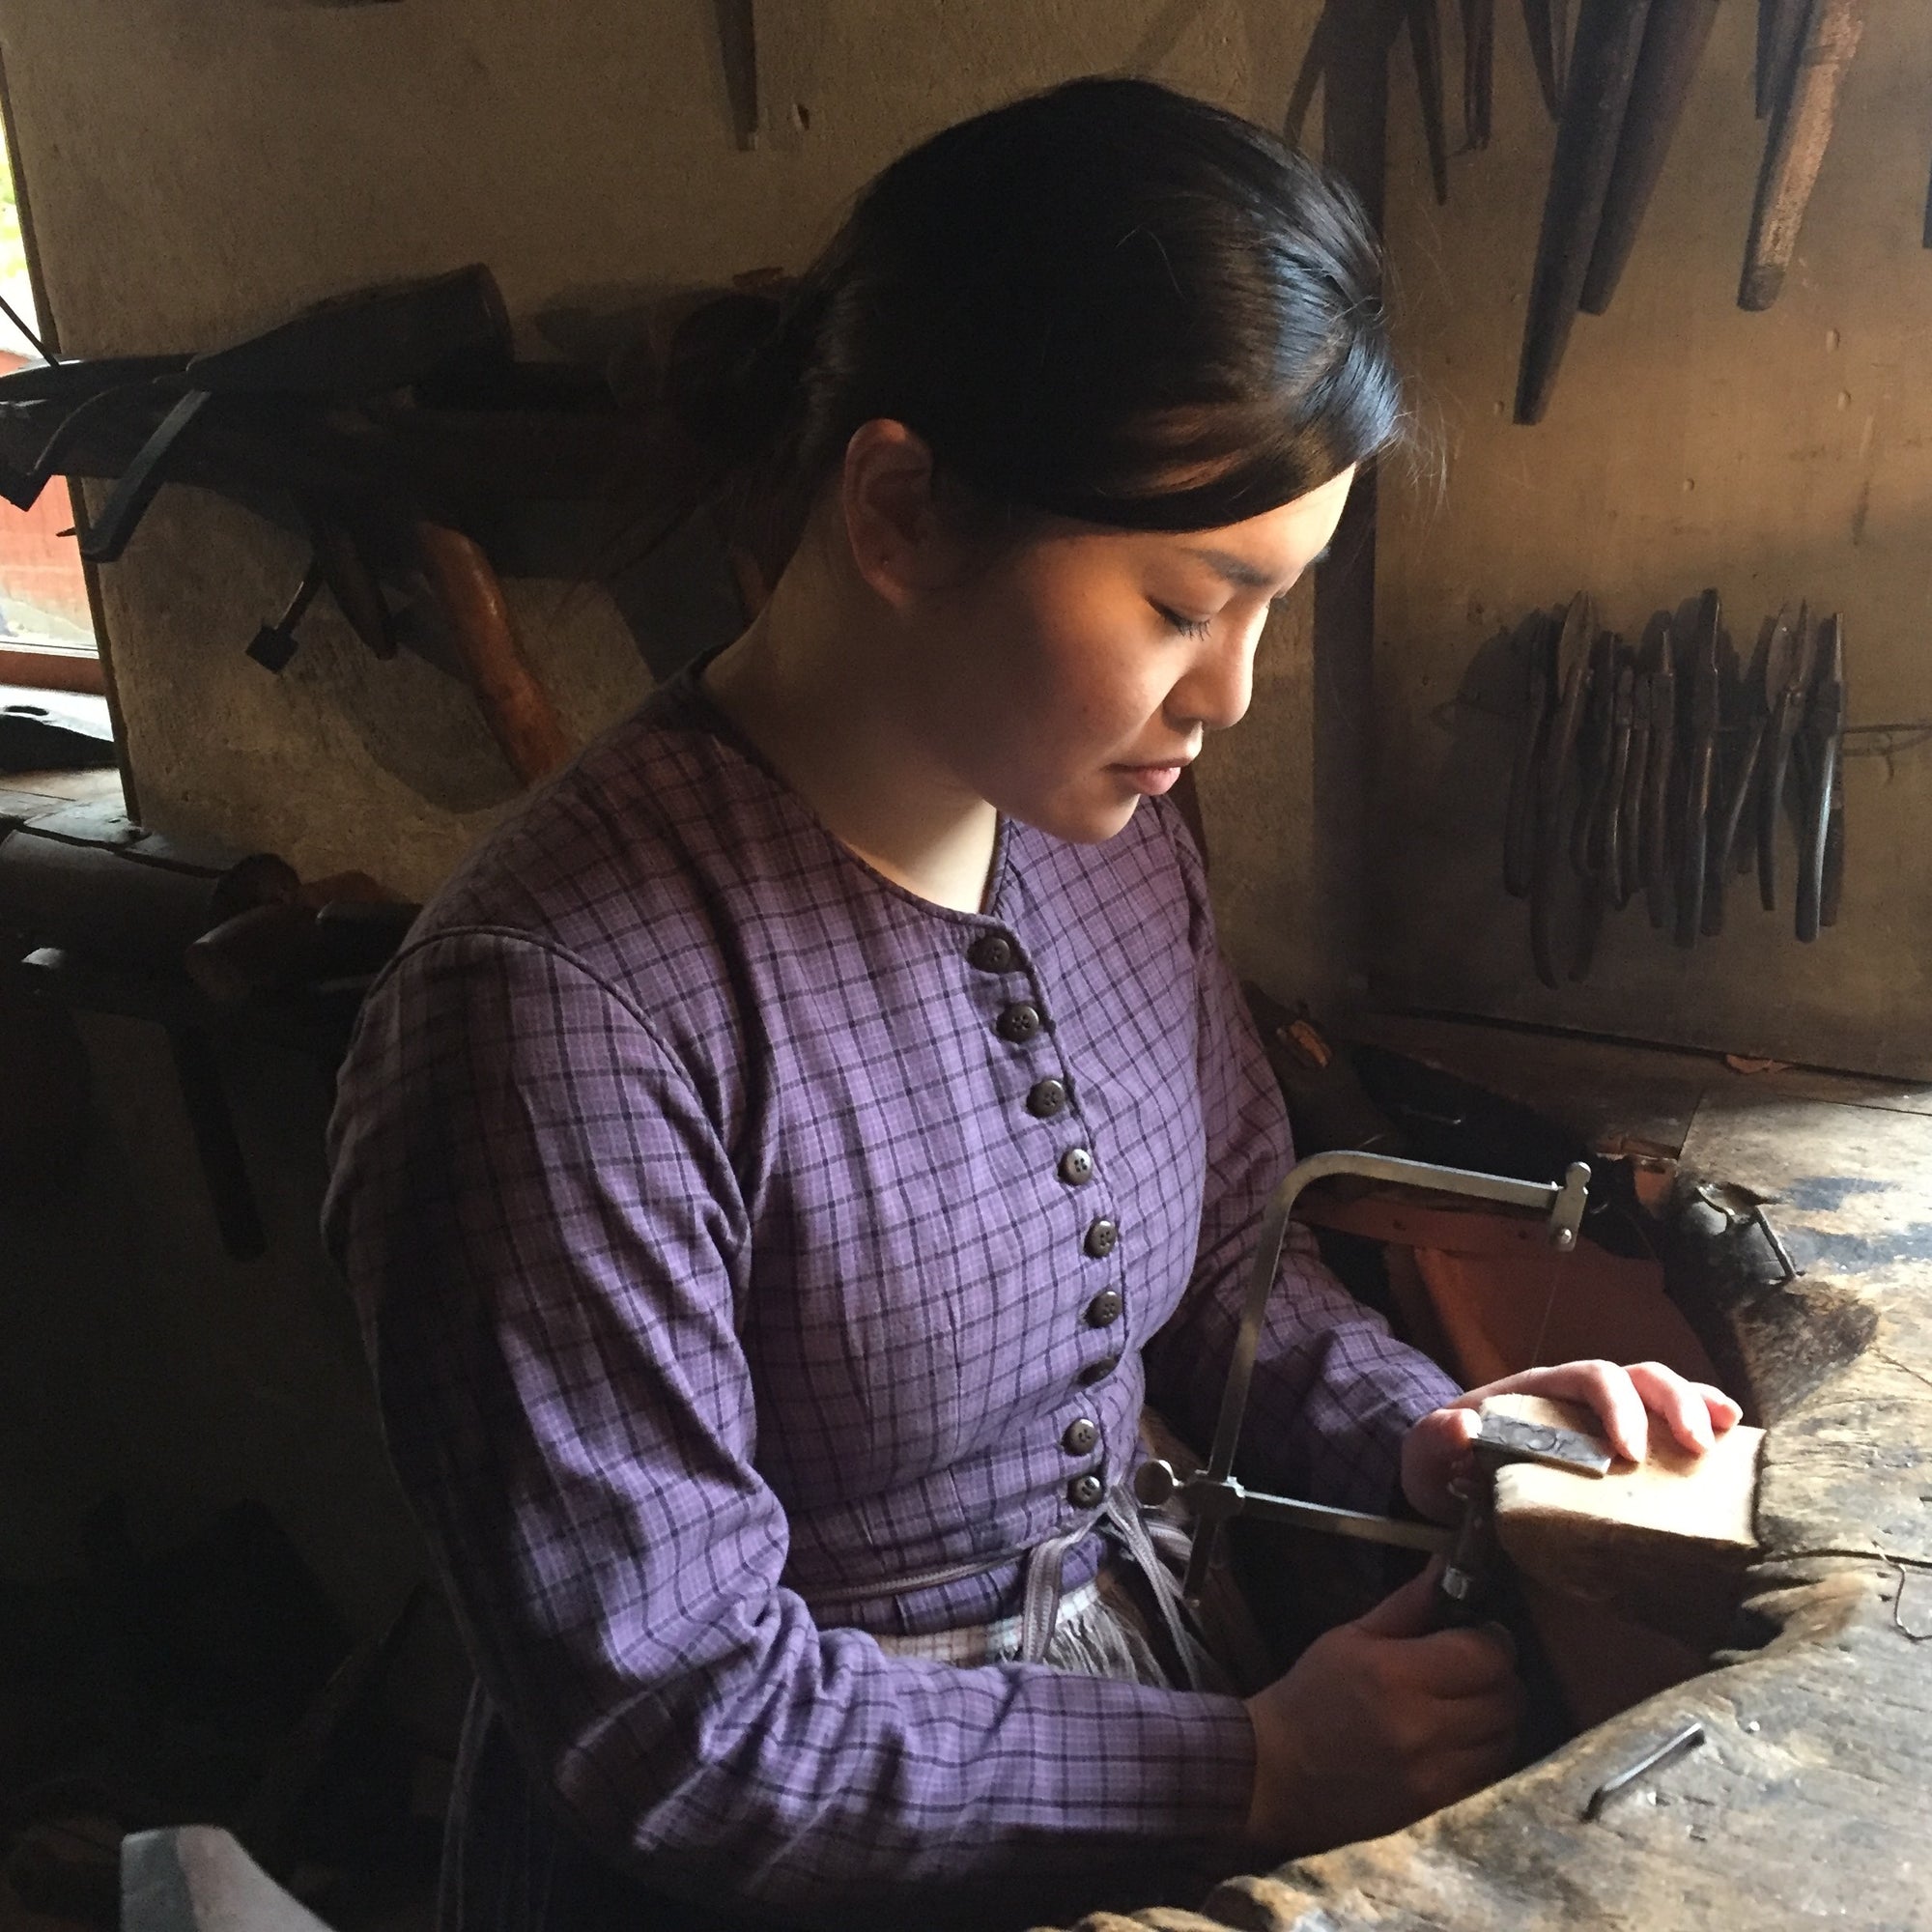 Working in a goldsmith's workshop from the 1800's